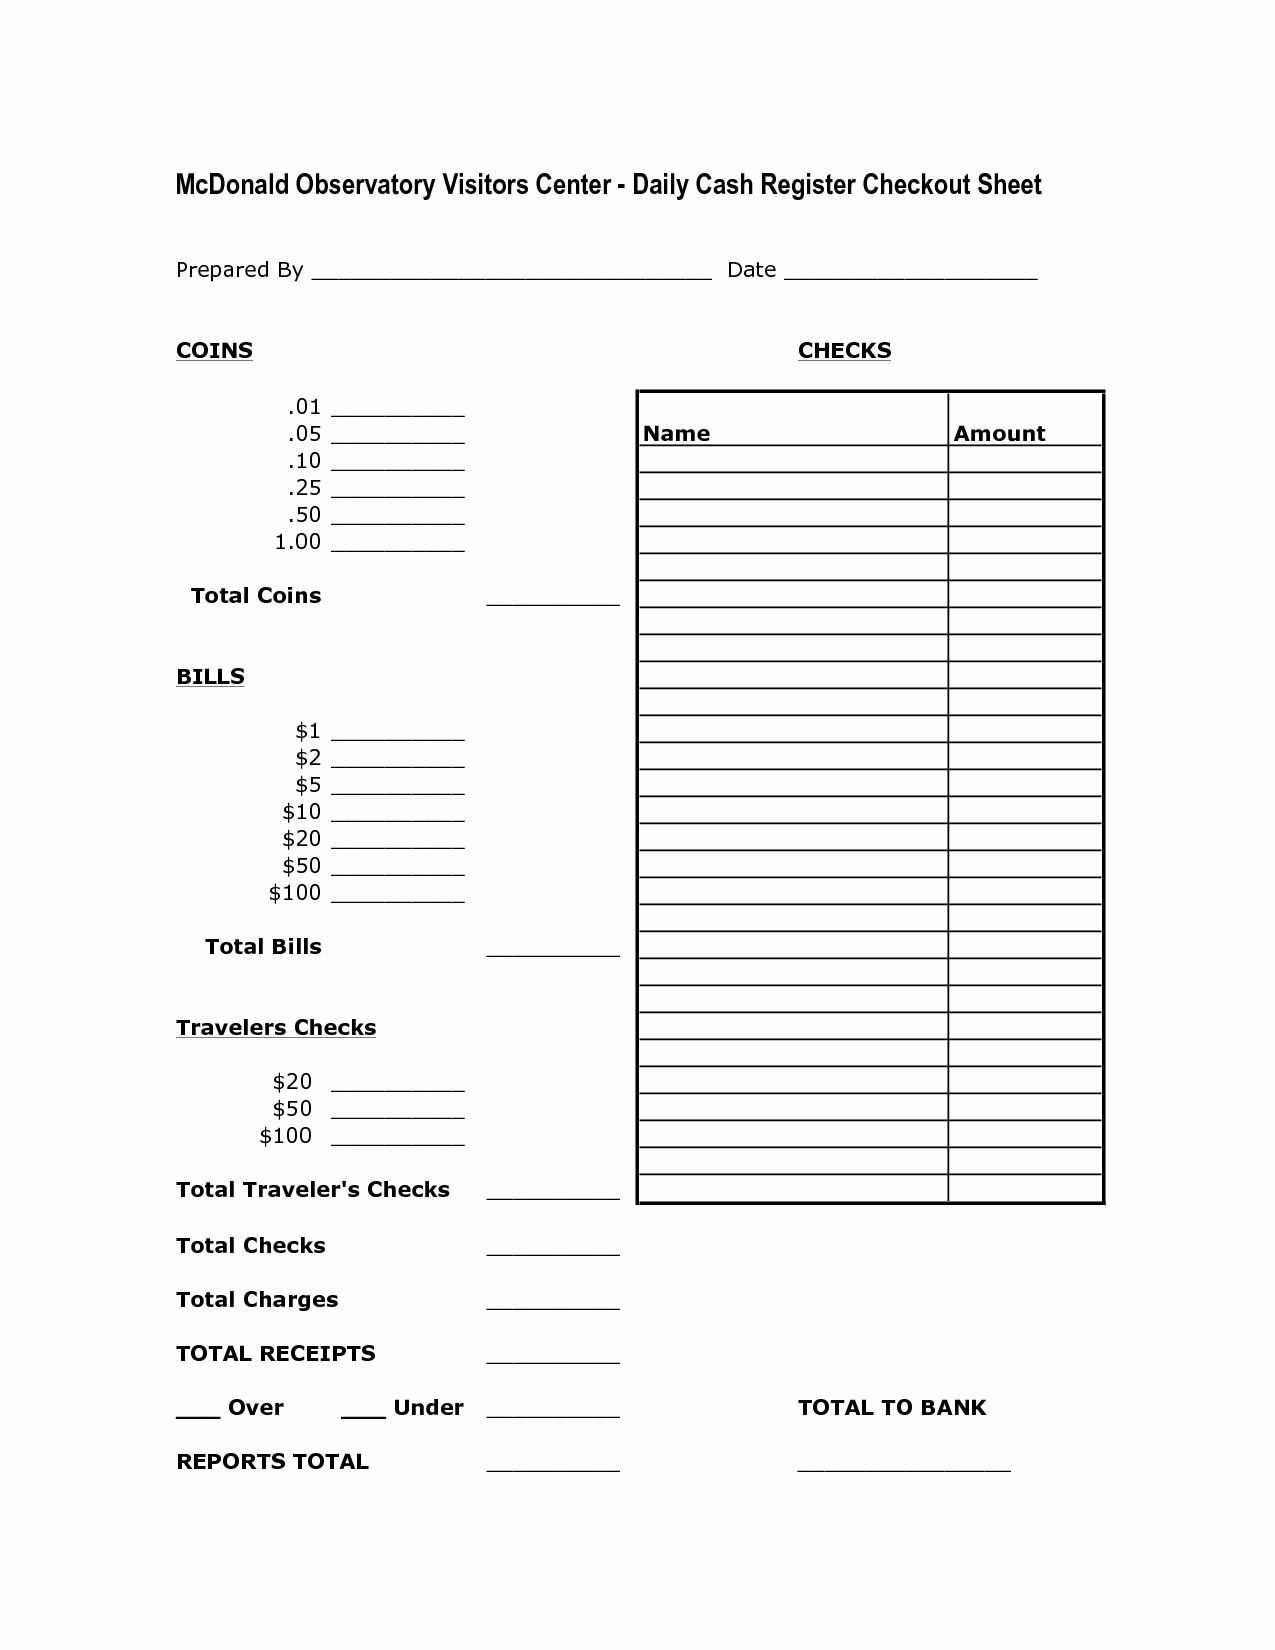 Balance Sheet Reconciliation Template Awesome Cash Drawer Count Sheet Template